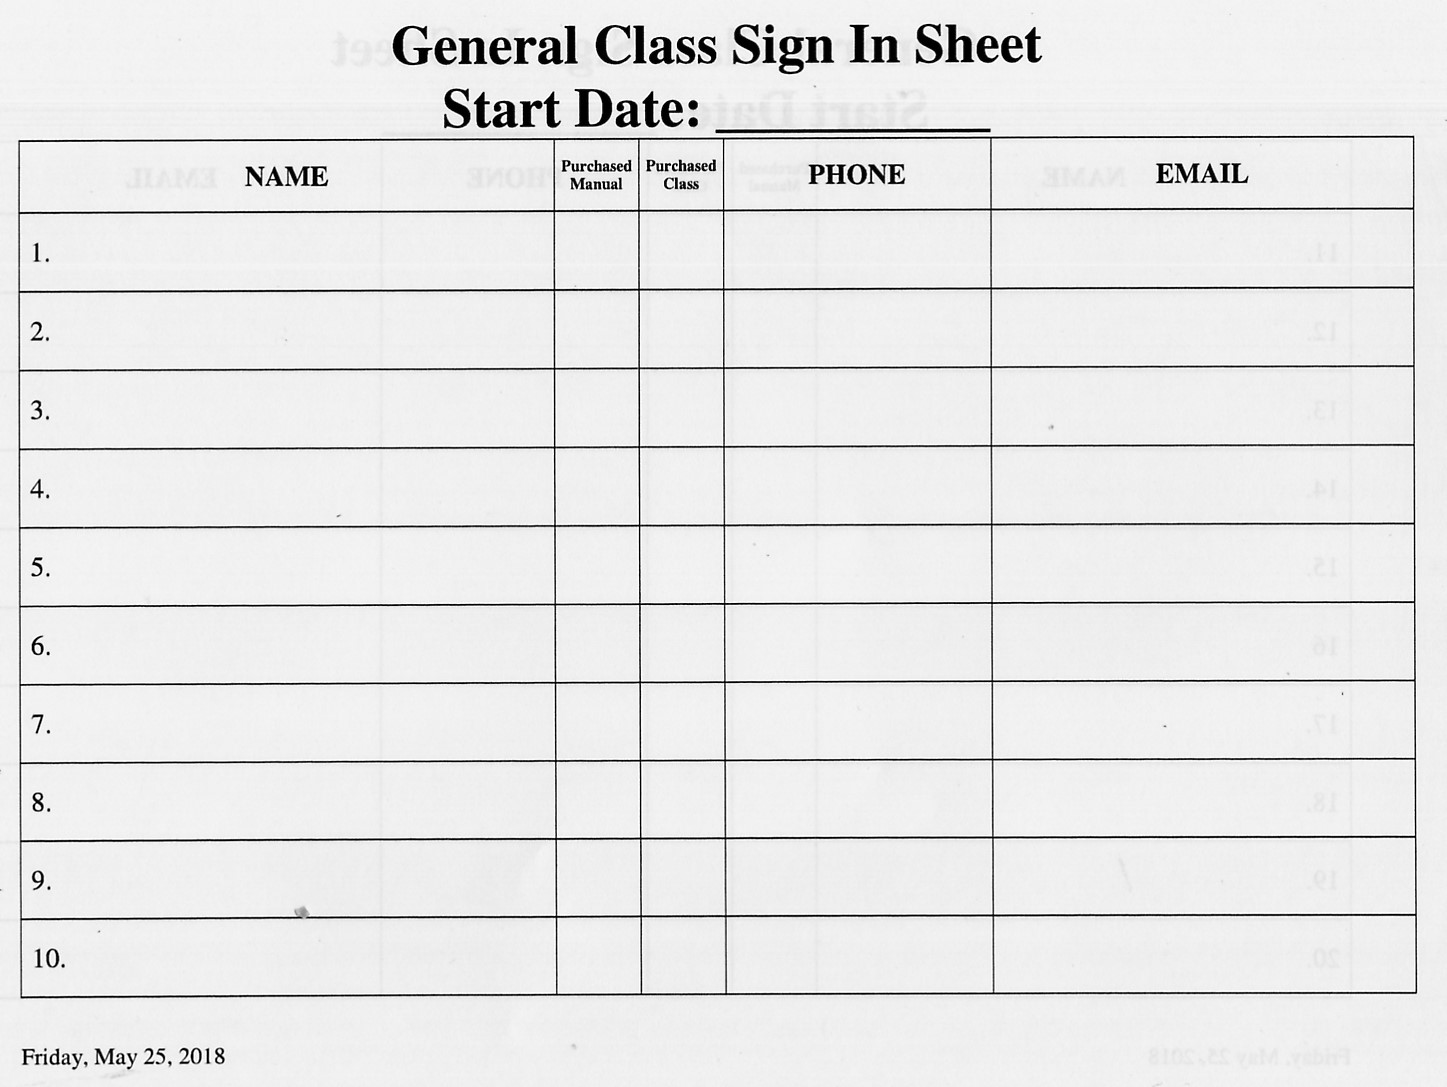 General Class License Sign In Sheet